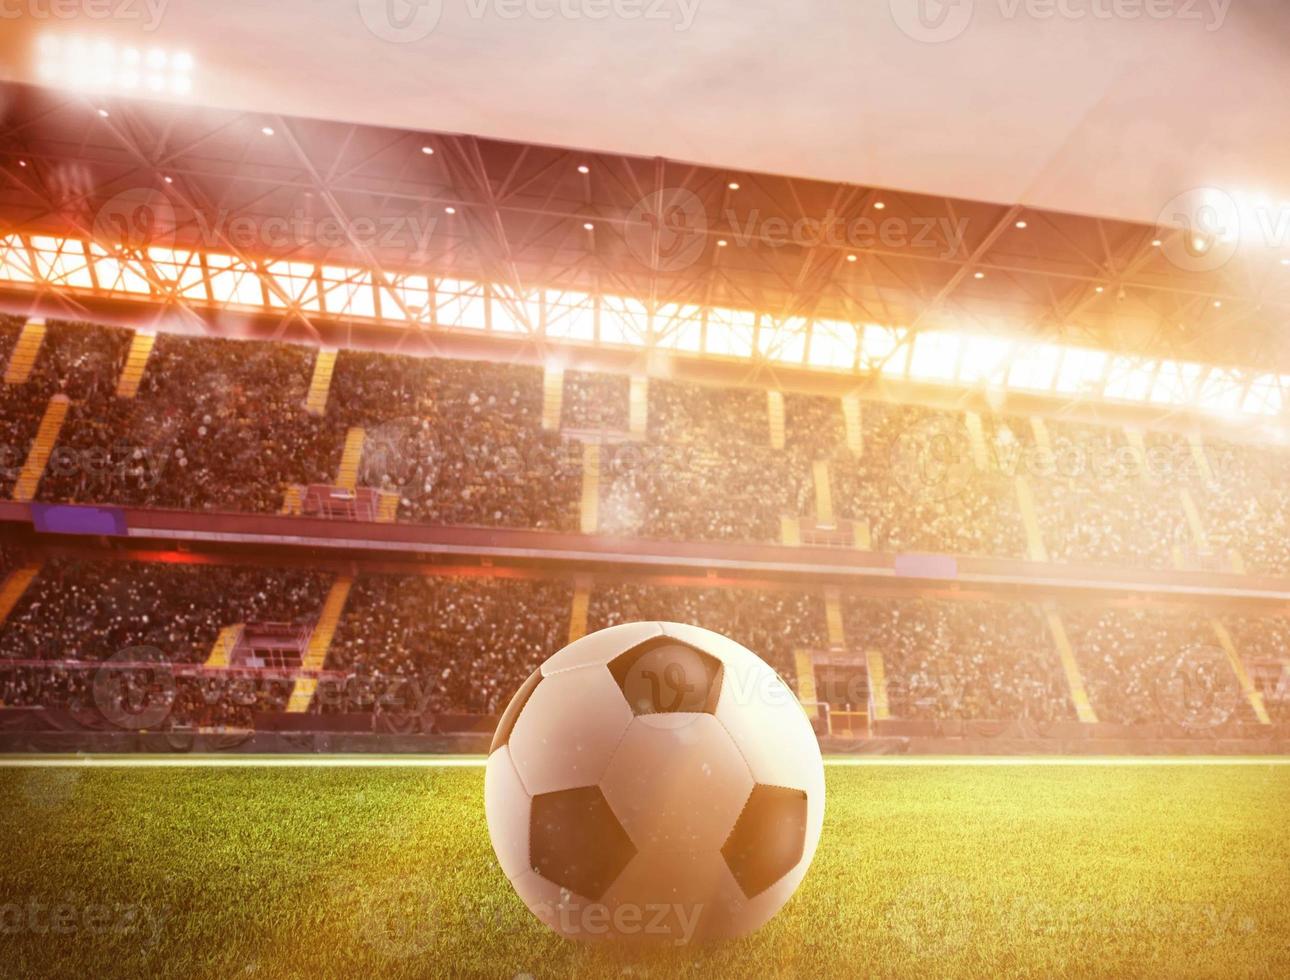 Soccerball at the stadium during sunset photo